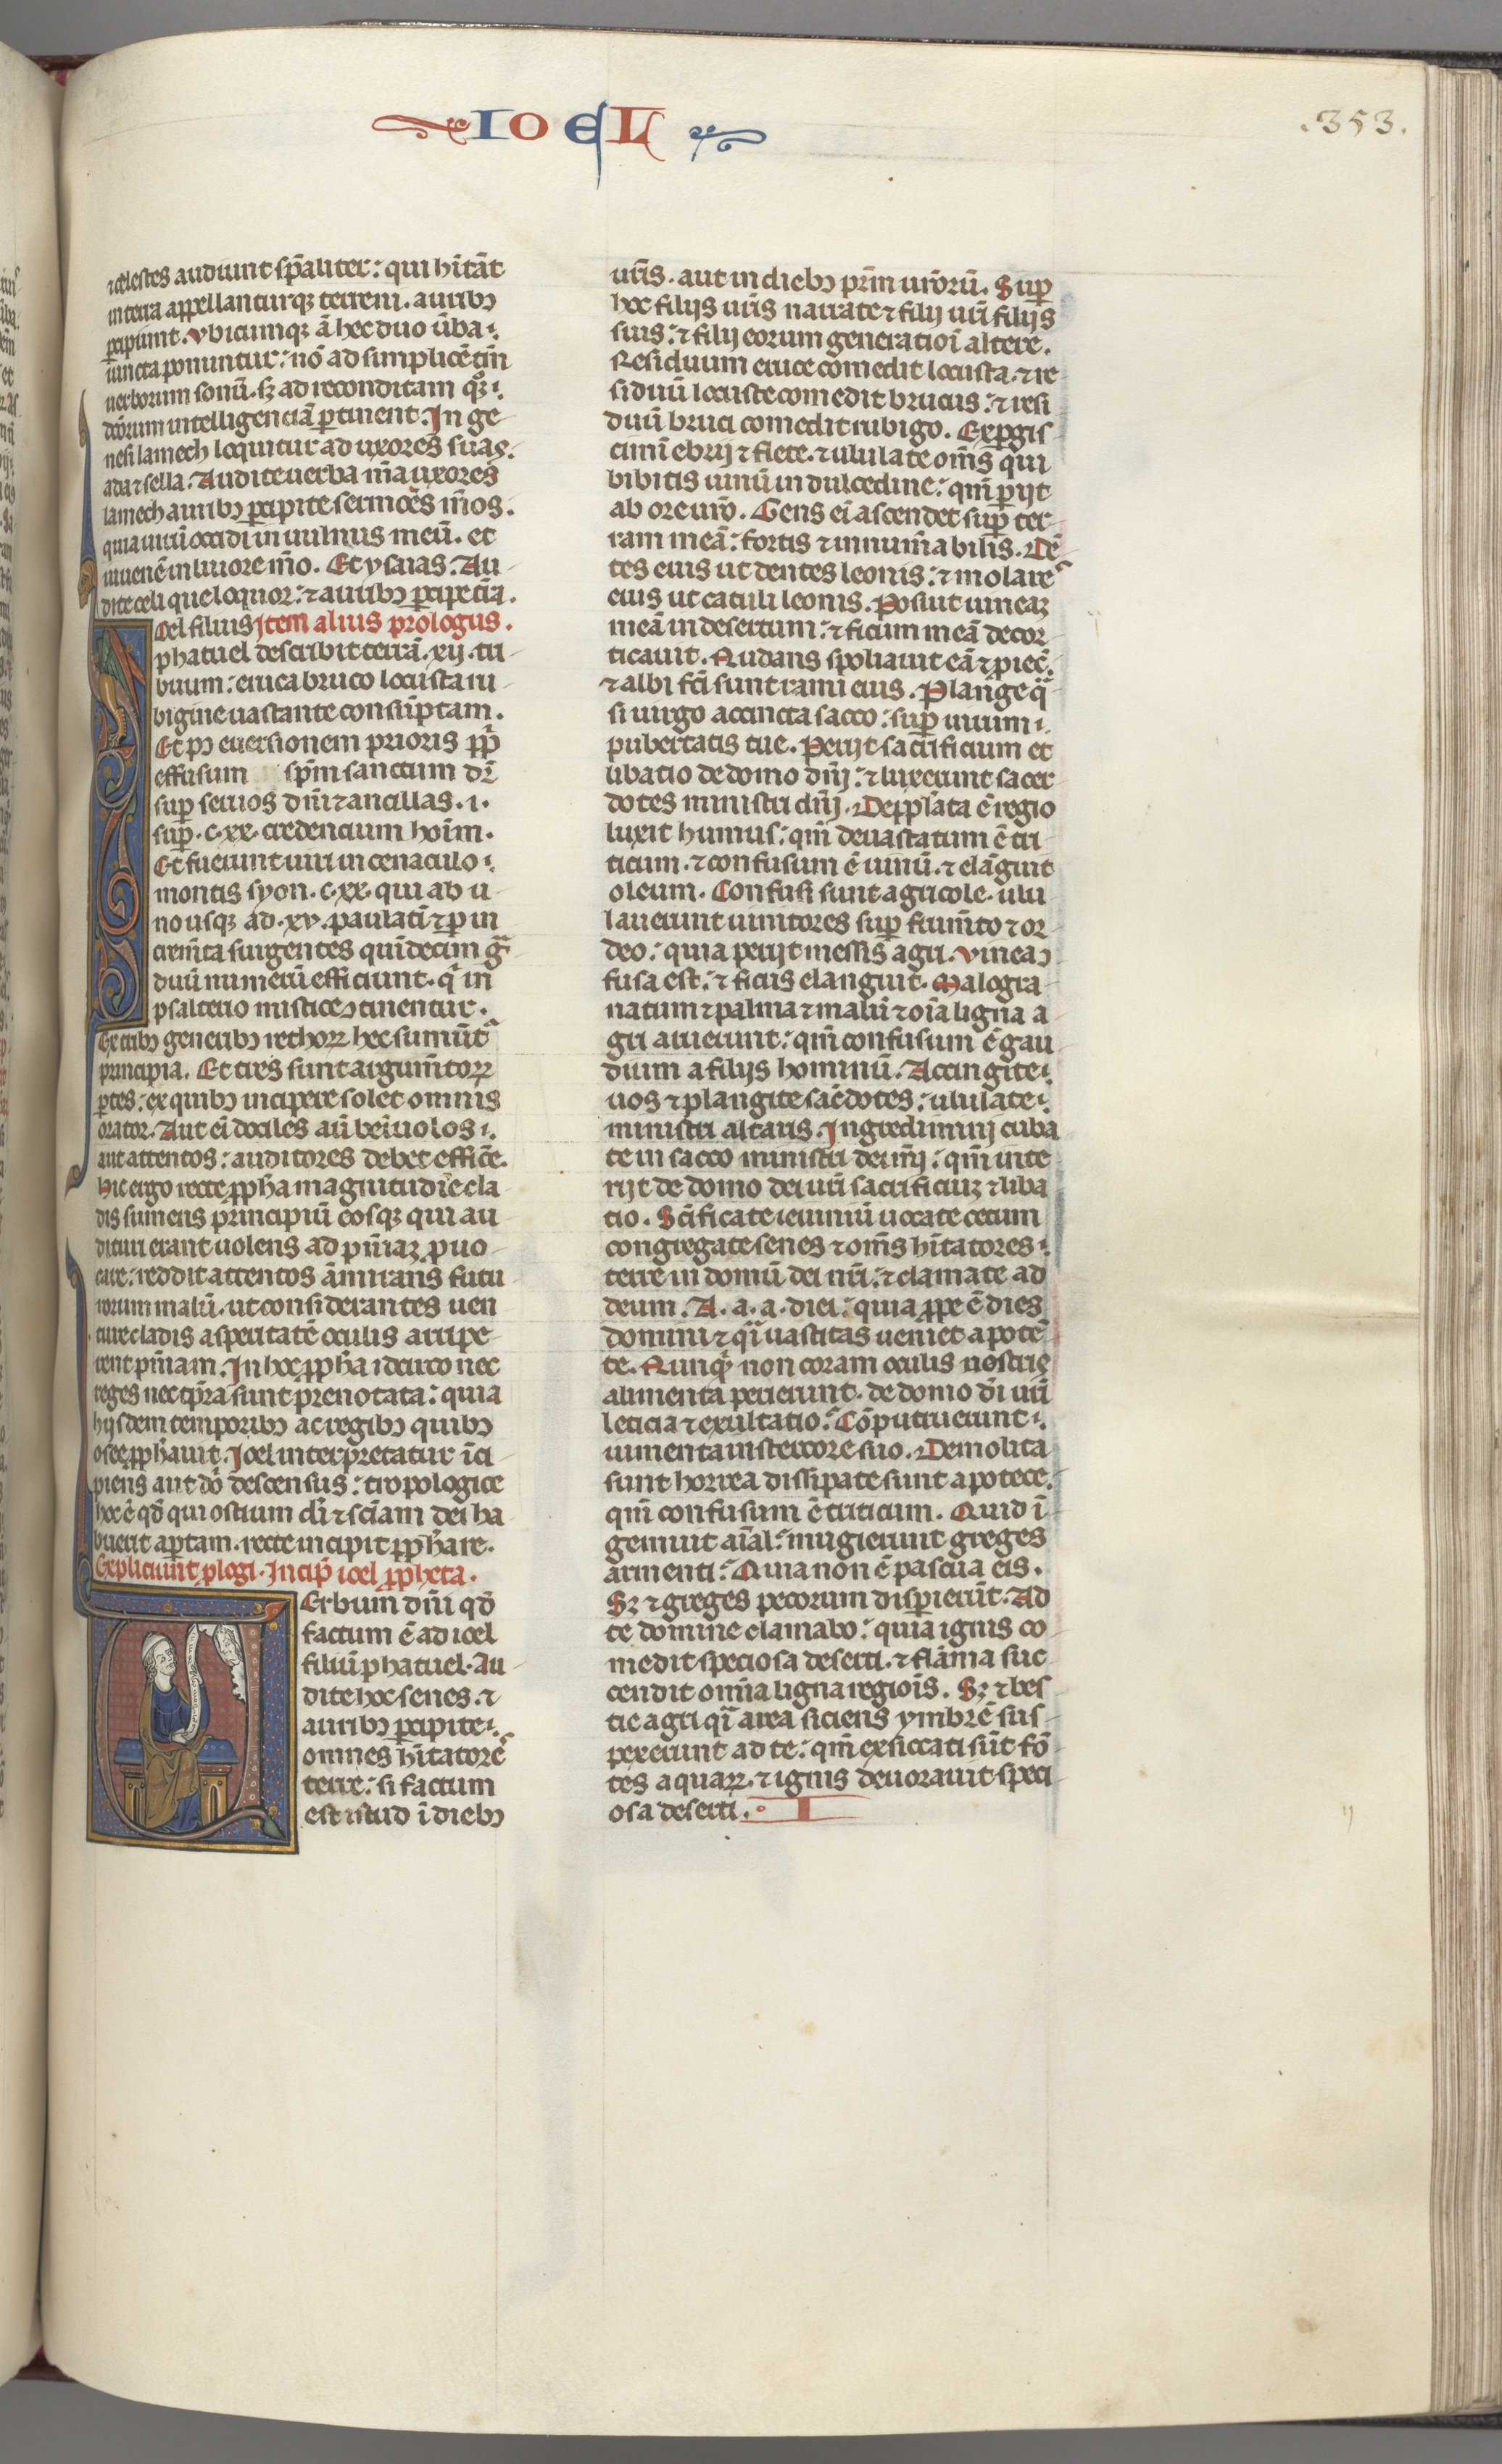 Fol. 353r, Joel, historiated initial V, Joel seated with a scroll, bust of God above